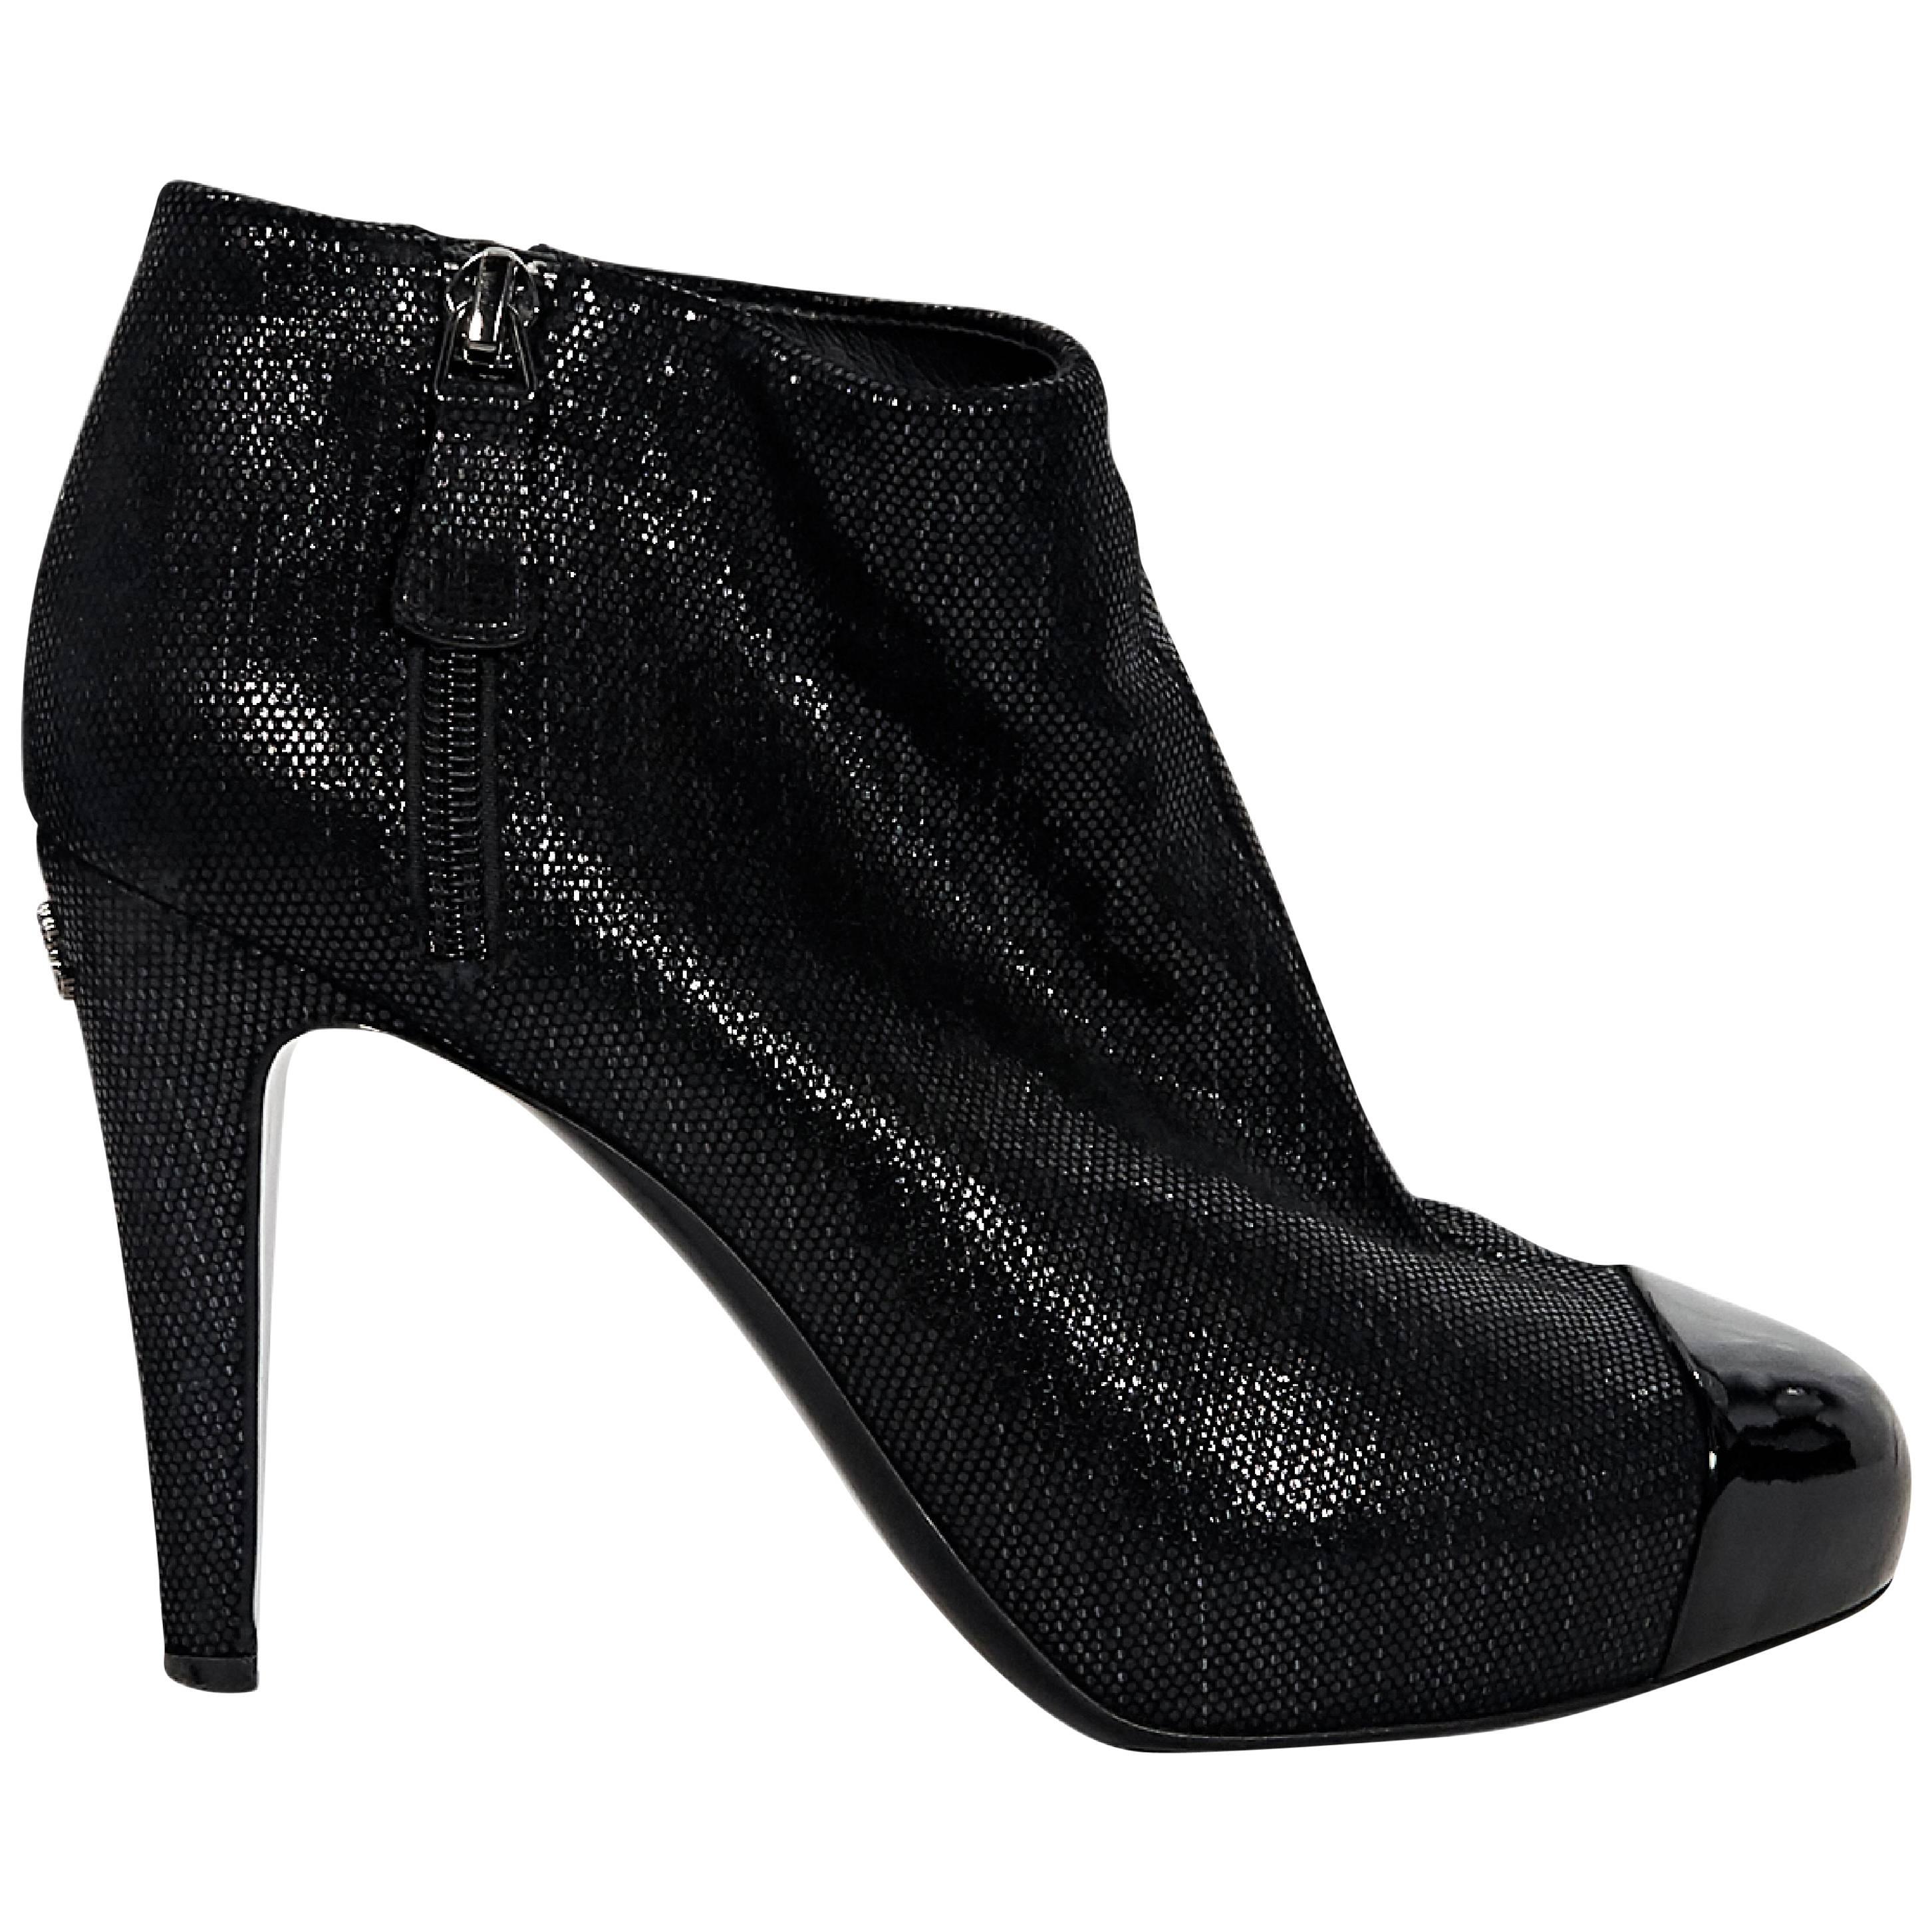 Black Chanel Embossed Cap-Toe Ankle Boots